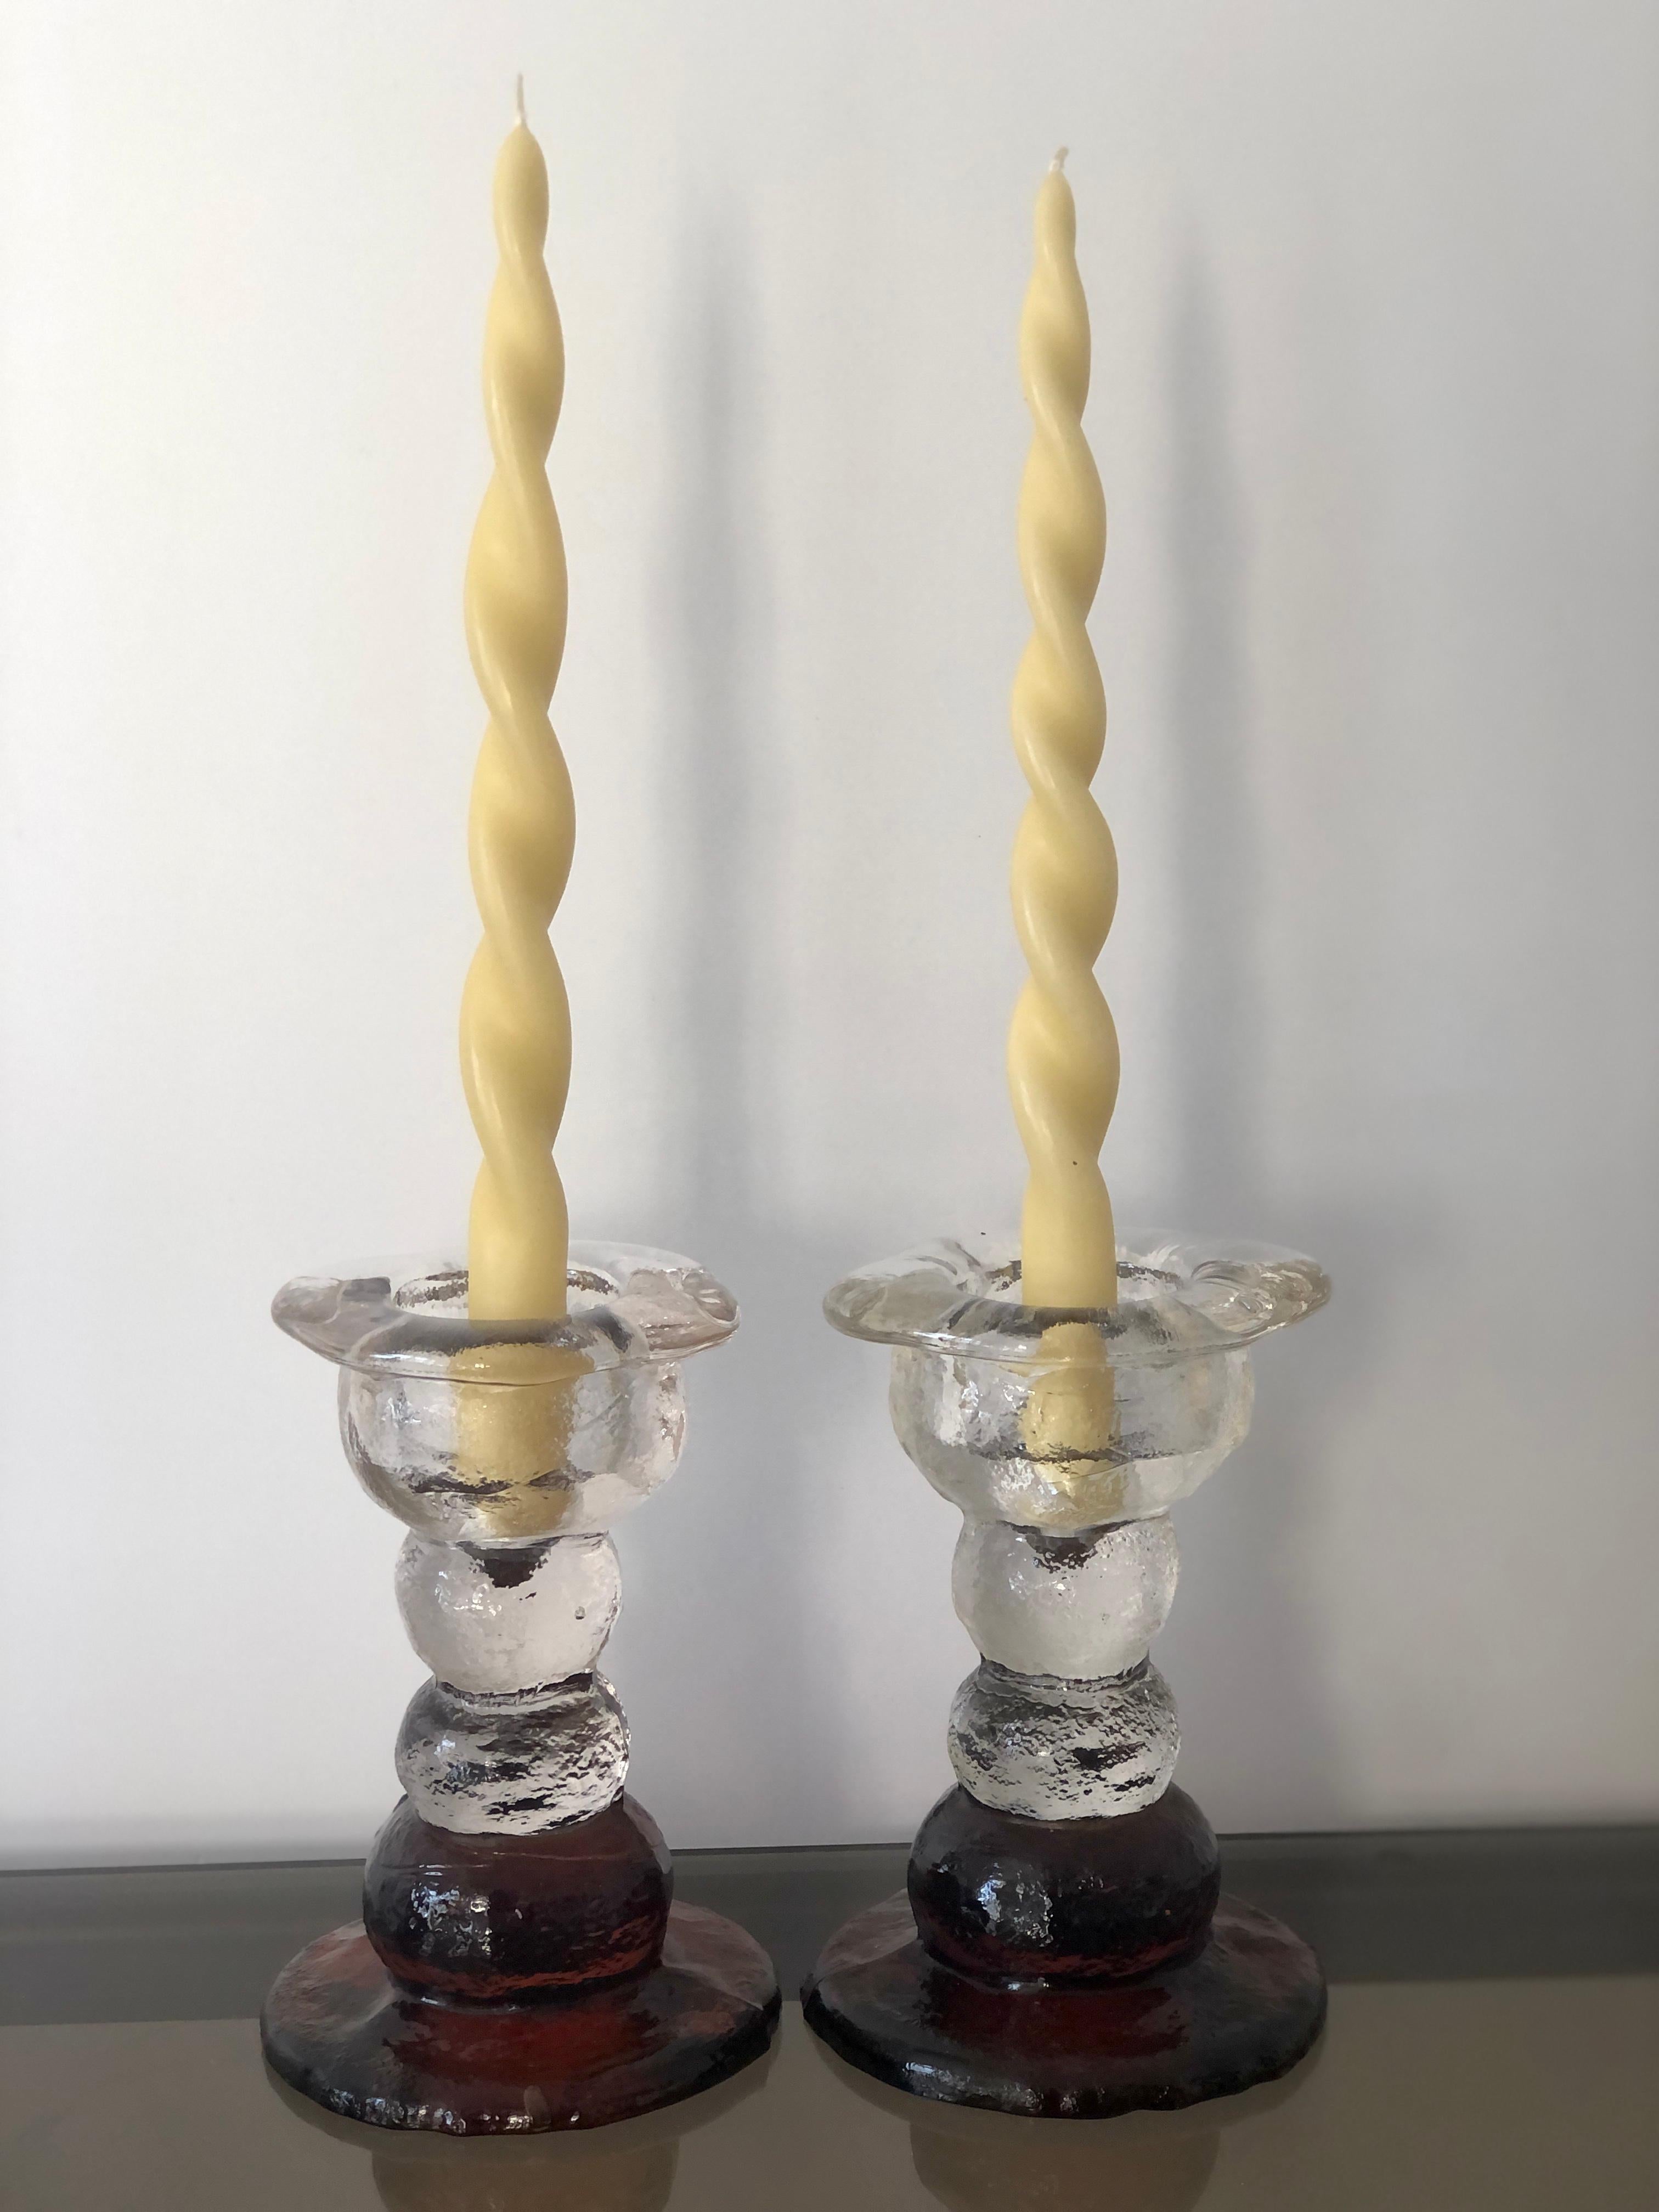 Late 20th Century 1970s Brutalist Candlesticks by Pertti Santalahti for Humppila, Finland